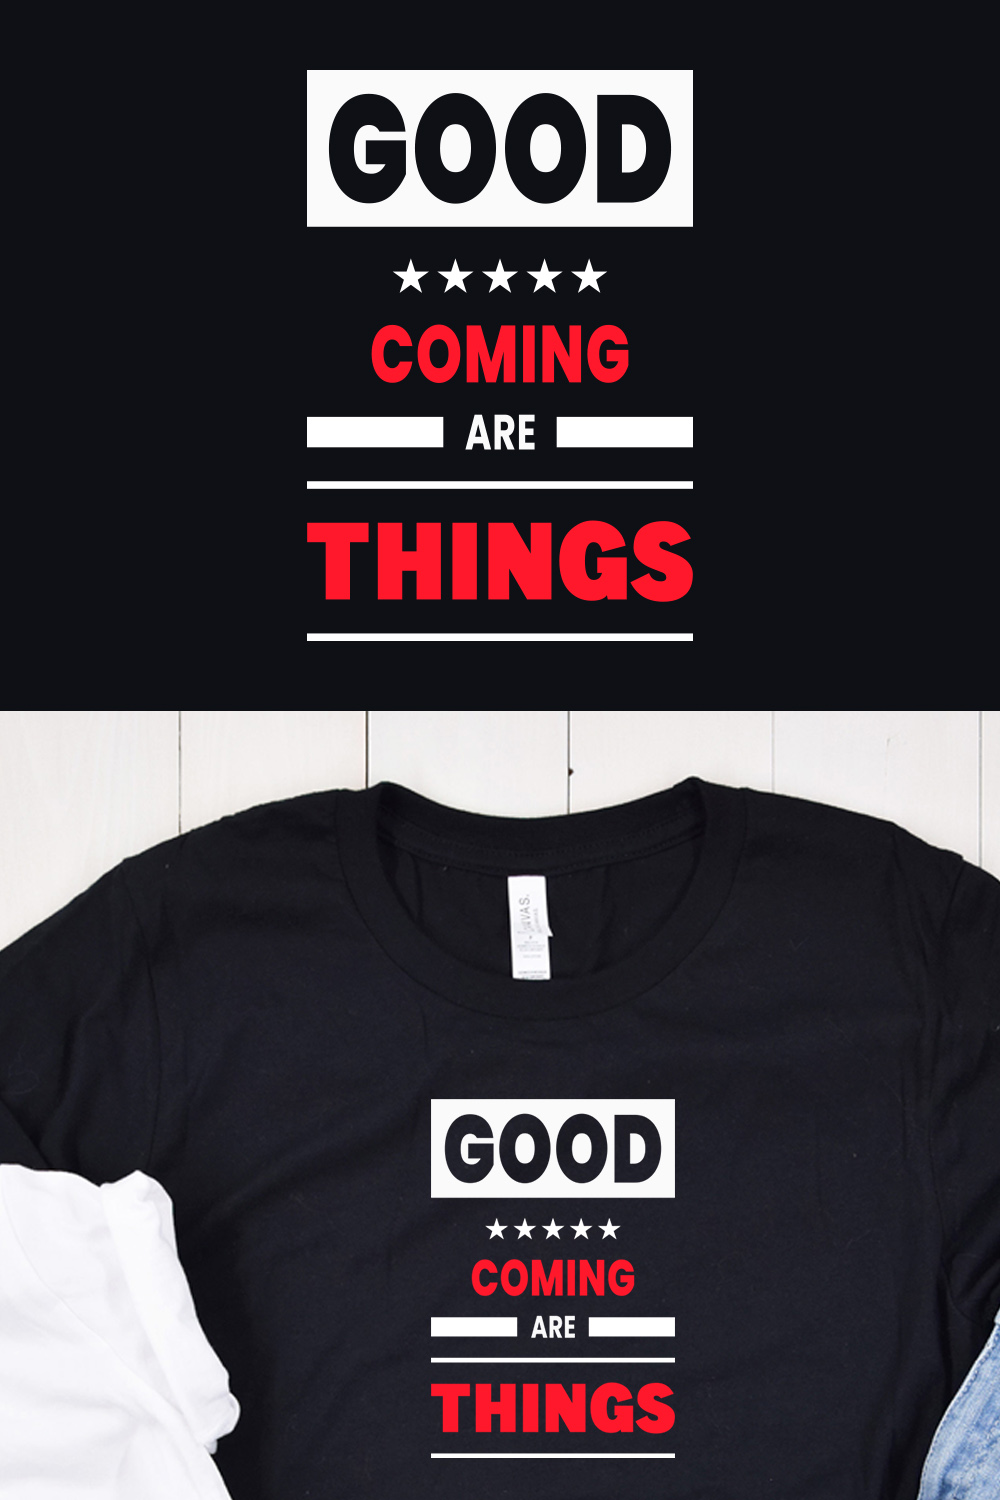 Good Things Are Coming Typography T-Shirt Design Pinterest image.